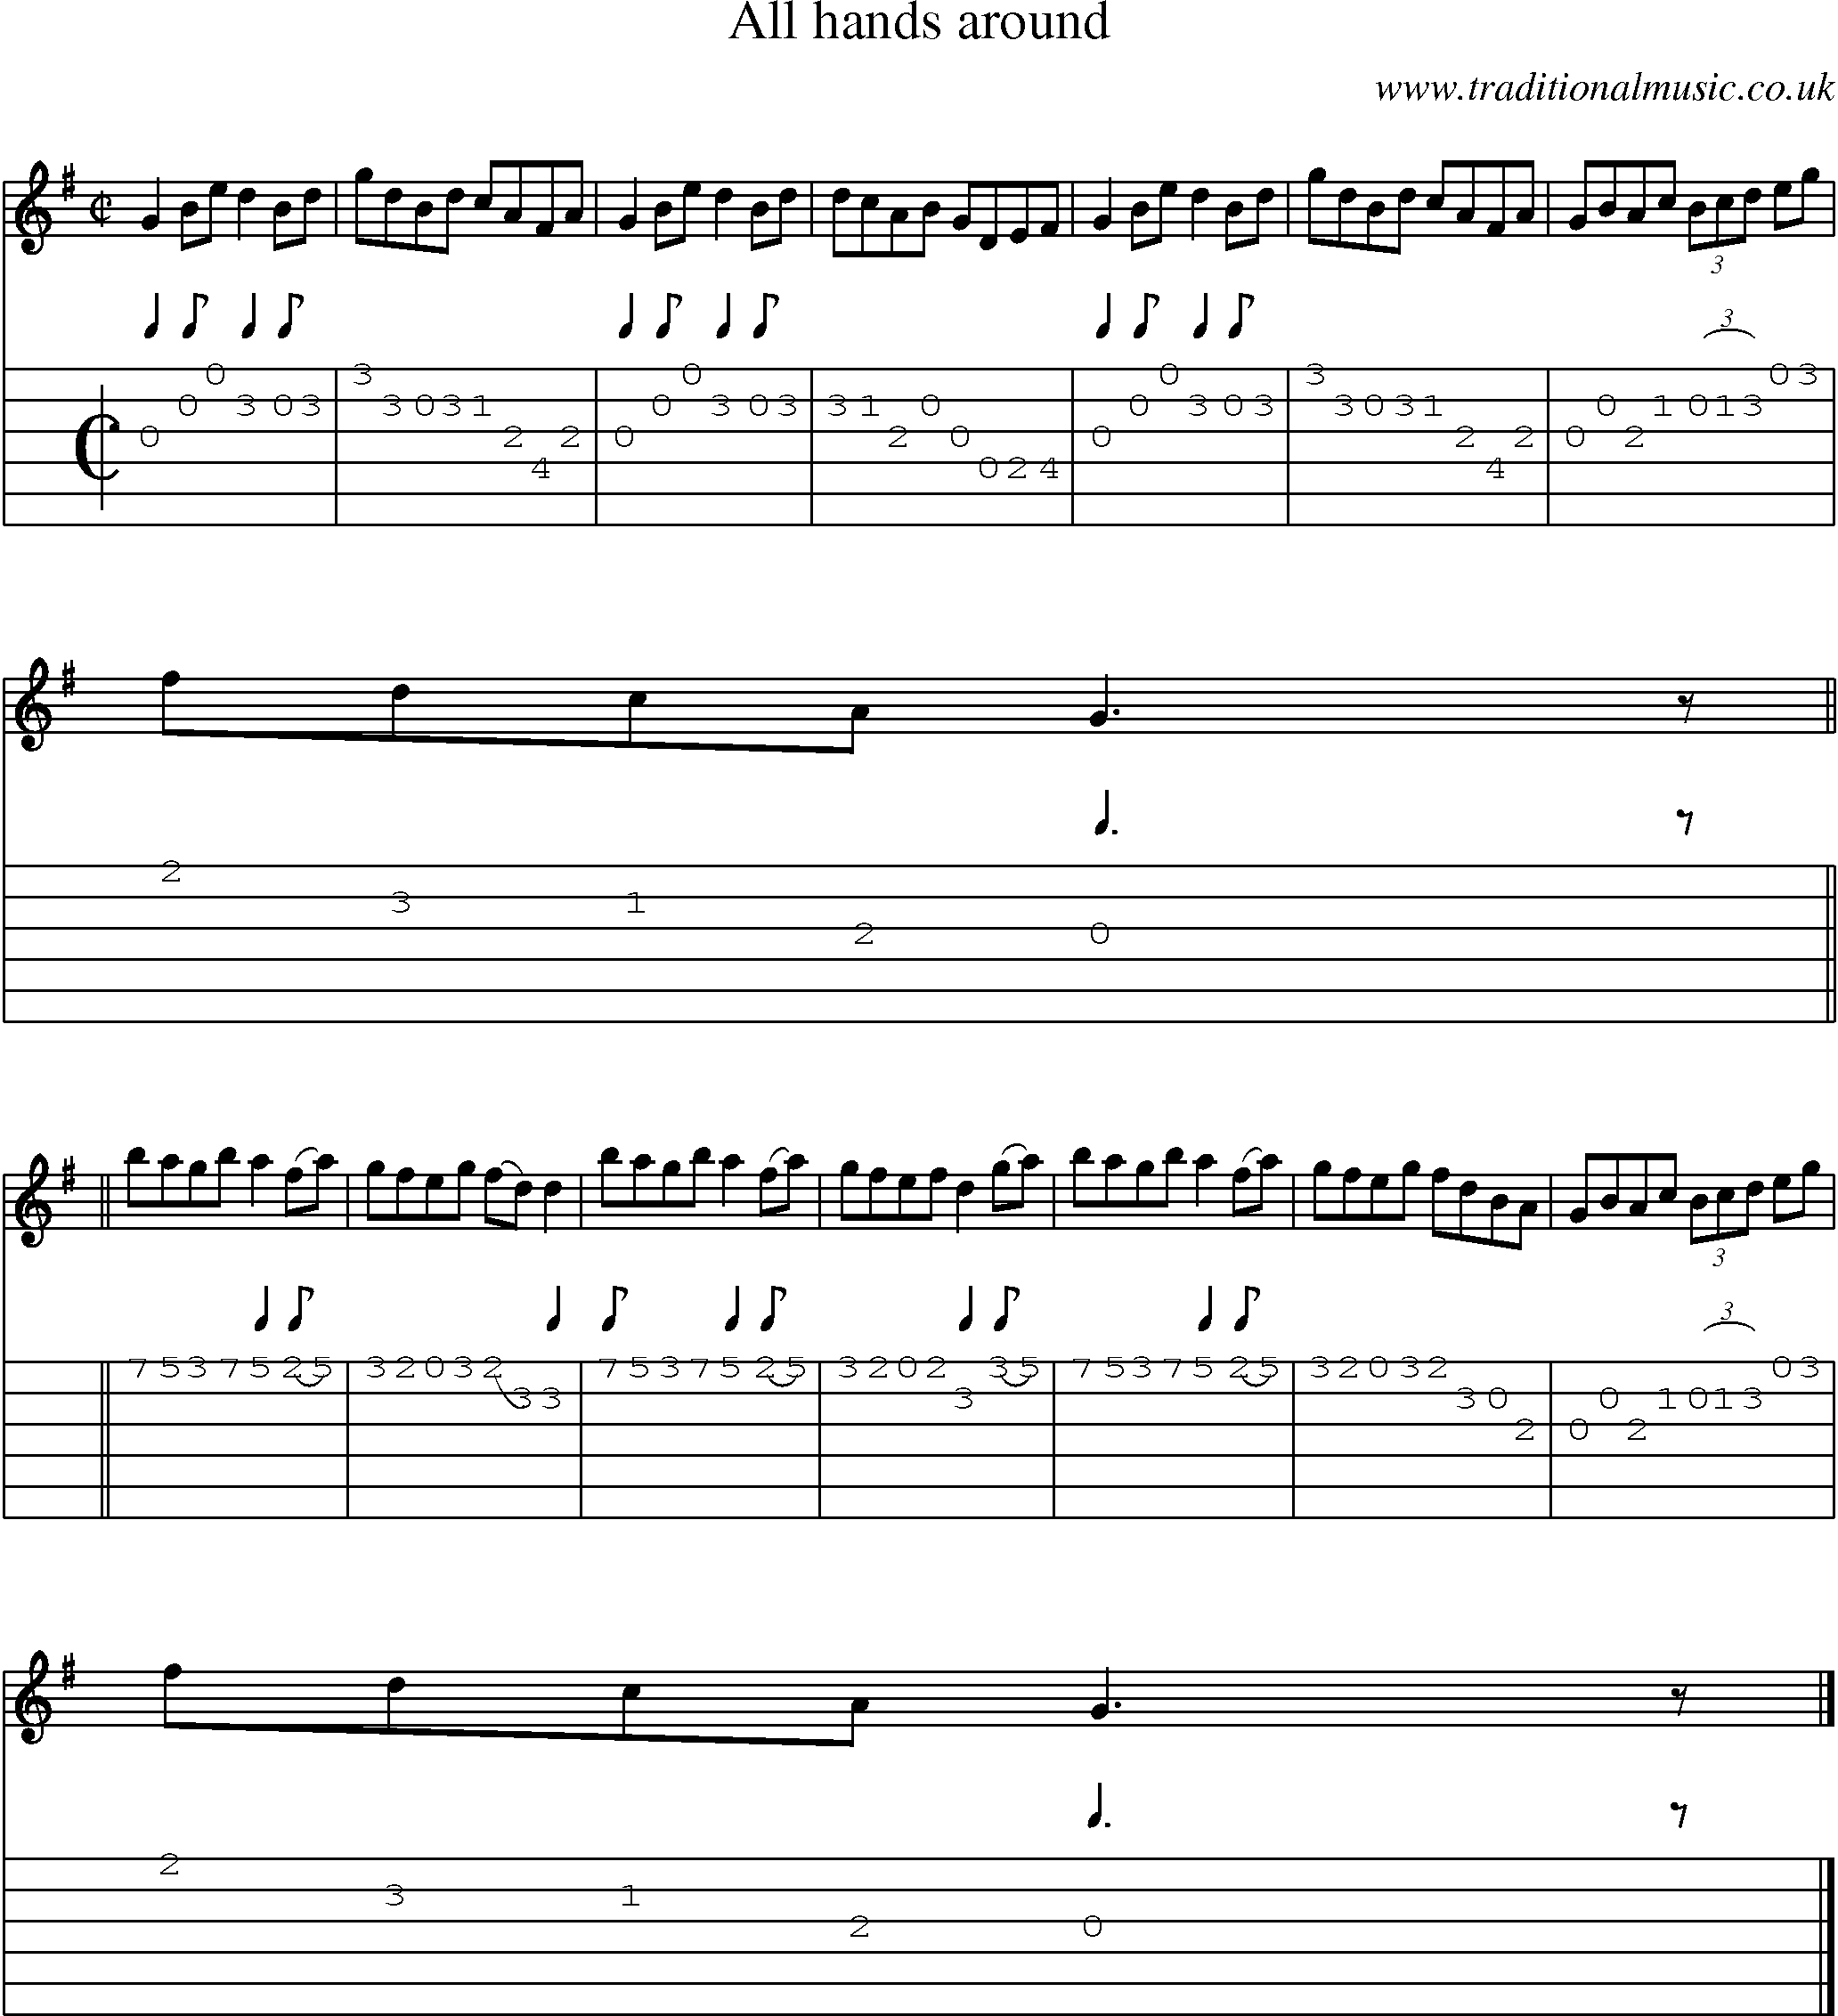 Music Score and Guitar Tabs for All Hands Around